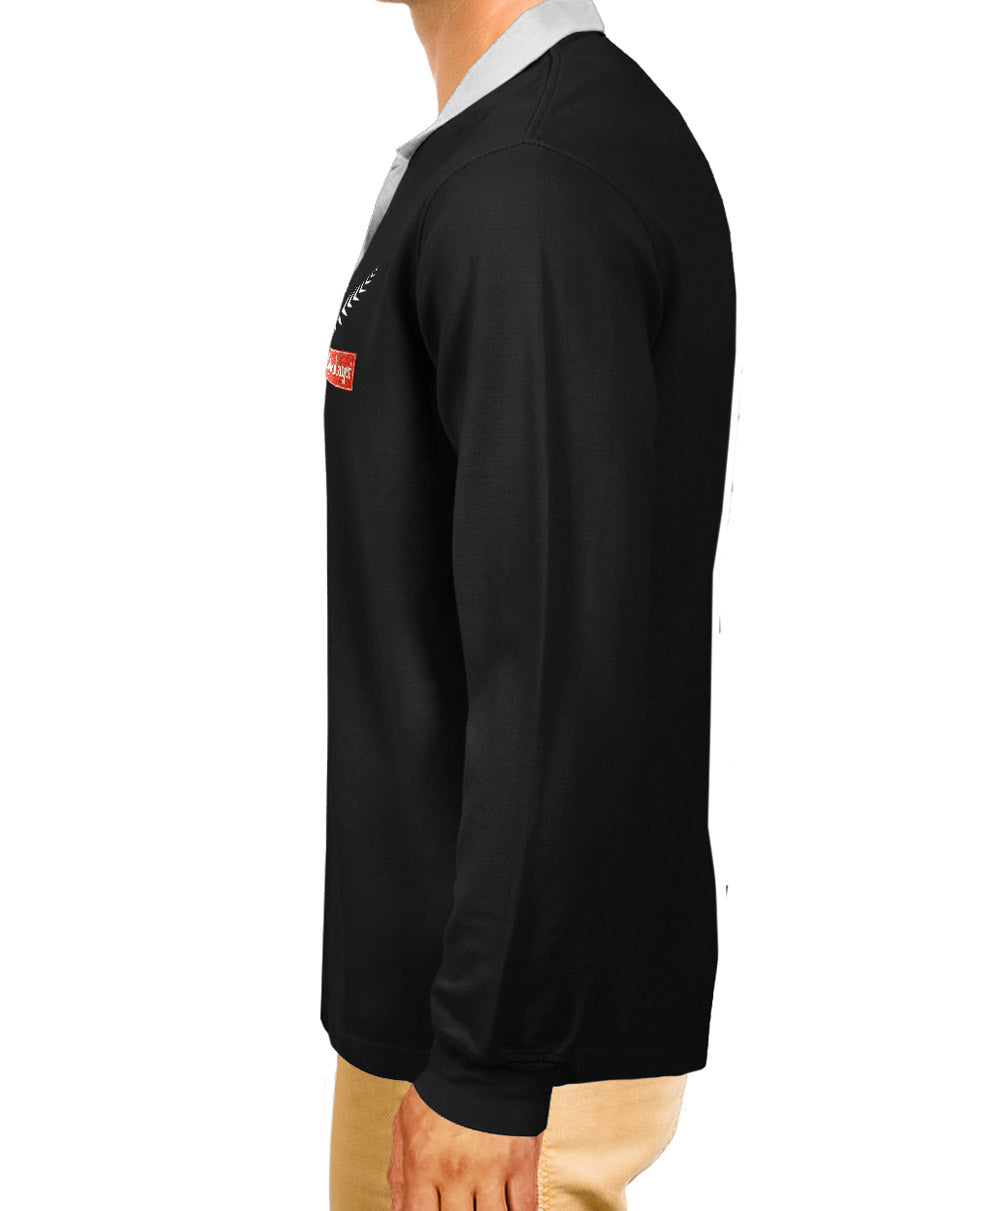 Steinlager Long Sleeve Rugby Jersey -  Beer Gear Apparel & Merchandise - Speights - Lion Red - VB - Tokyo Dy merch